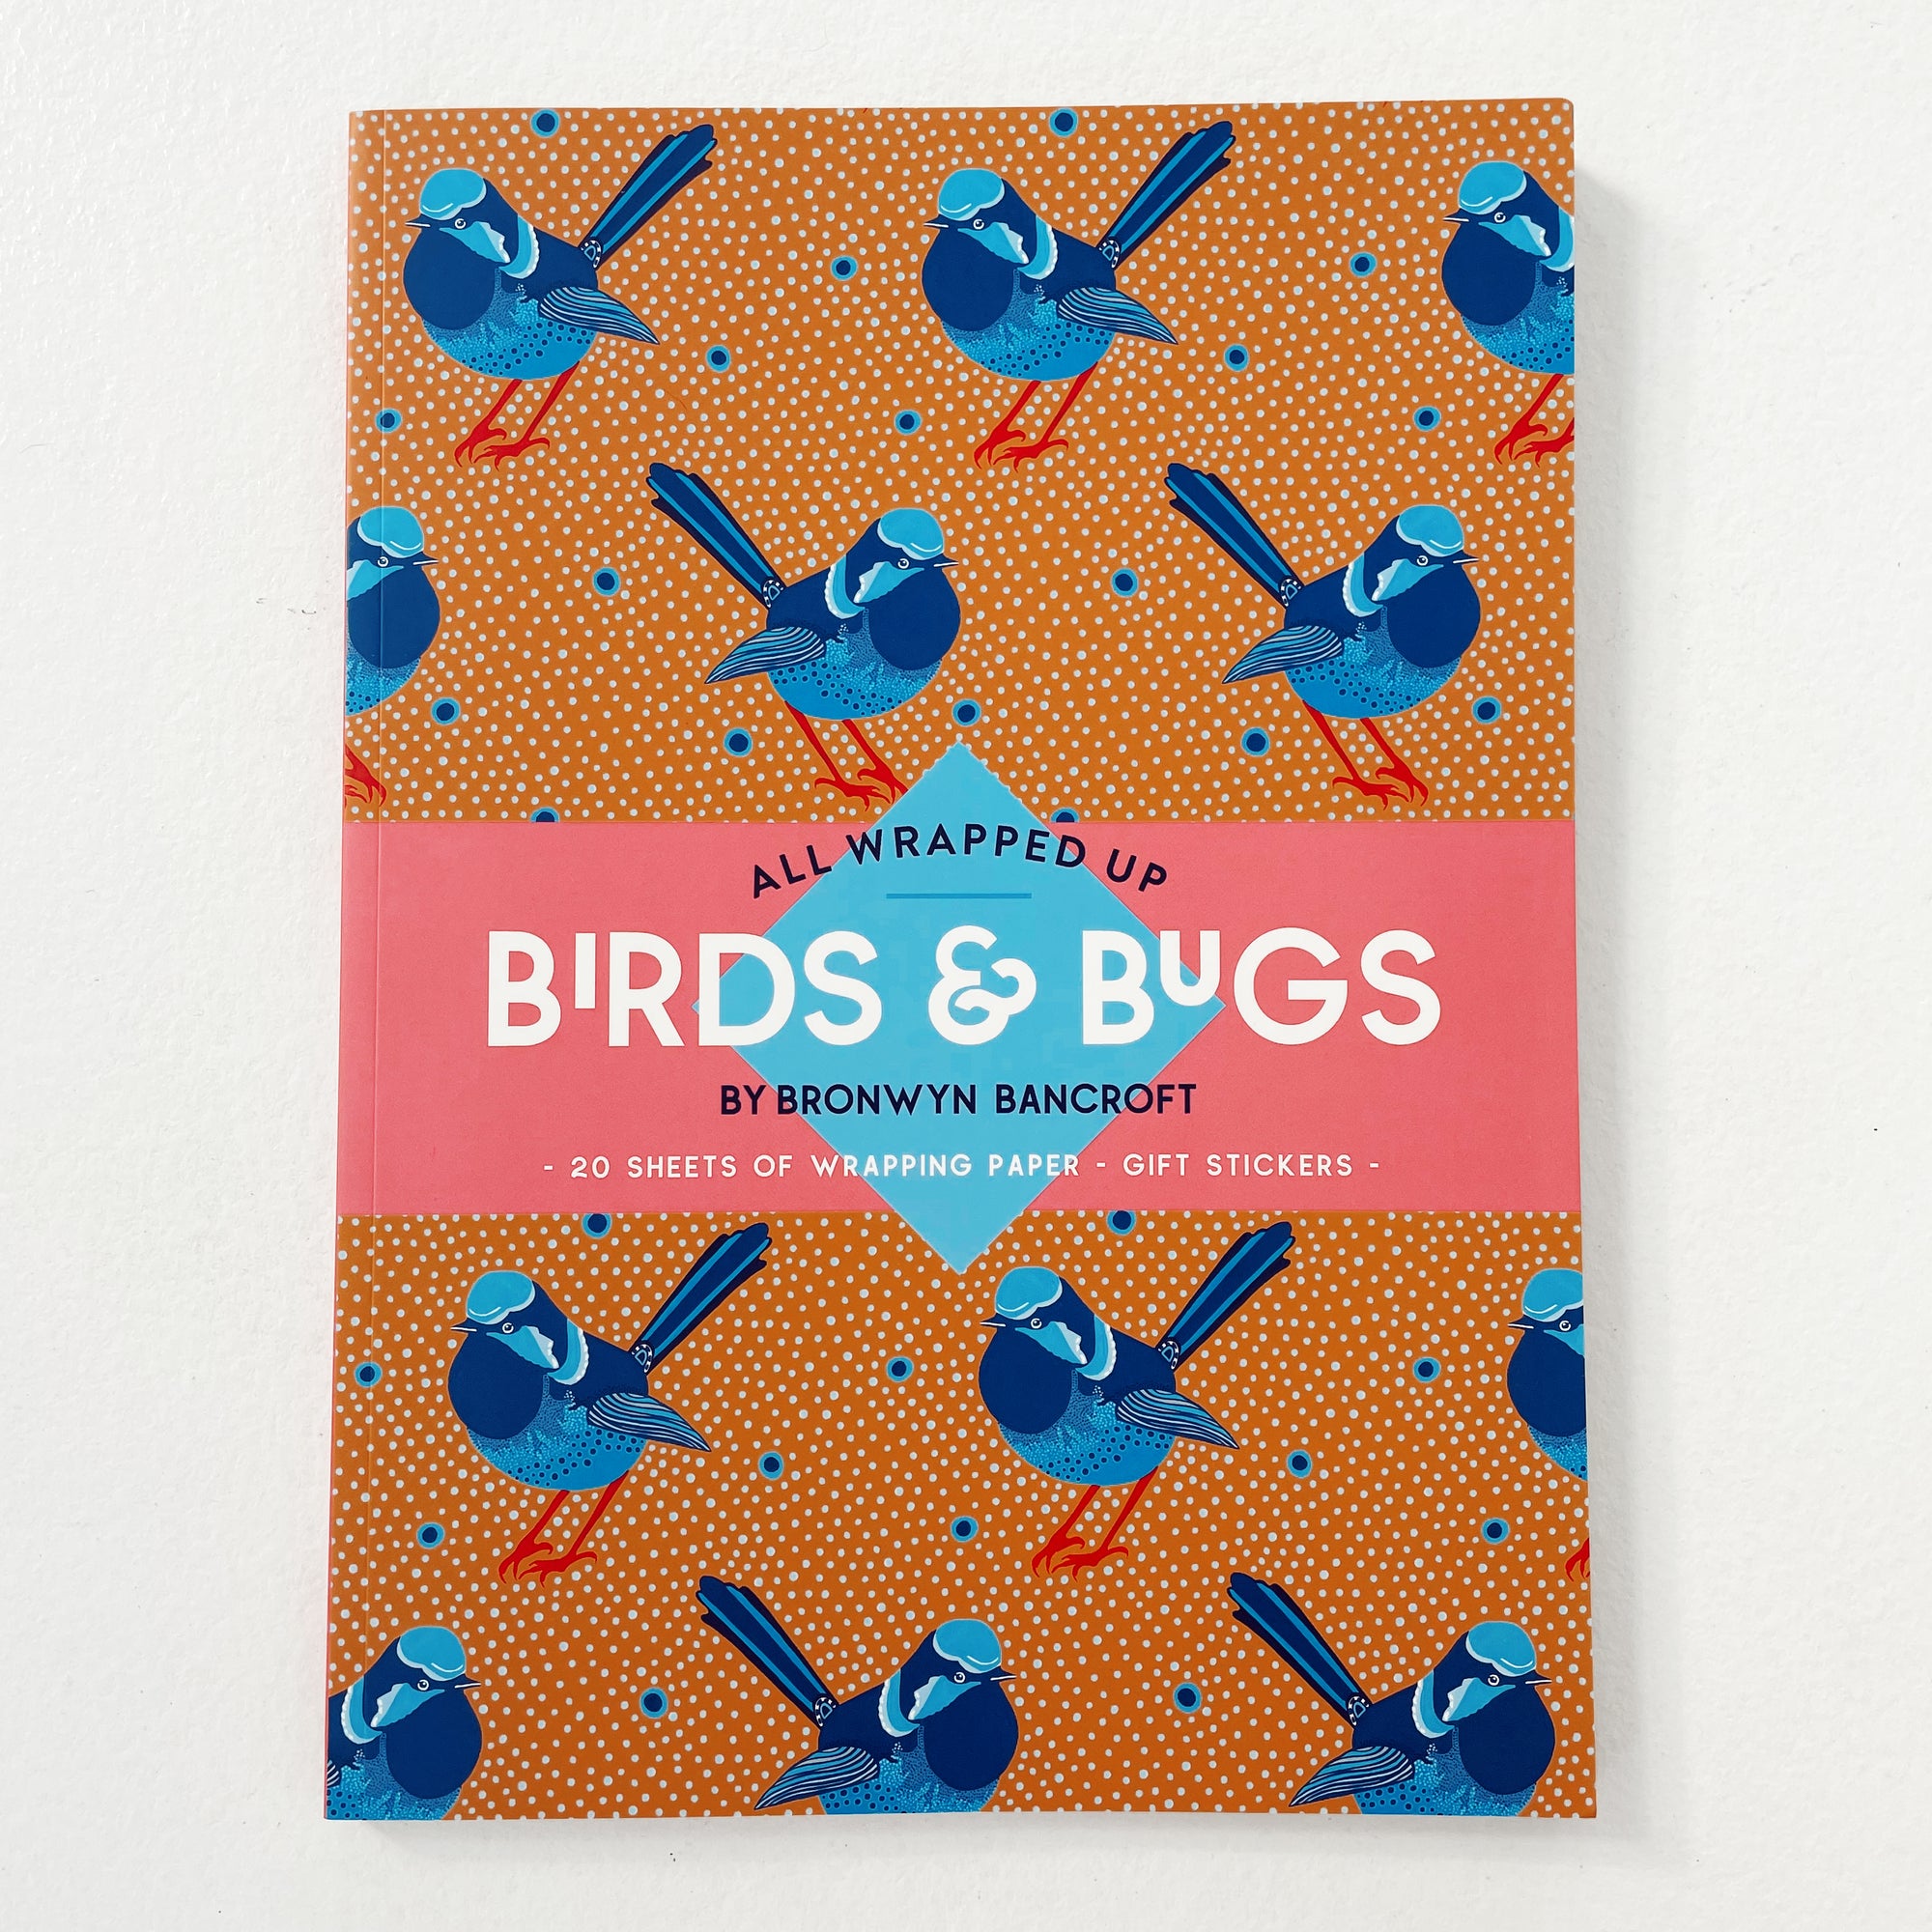 ALL WRAPPED UP: BIRDS & BUGS